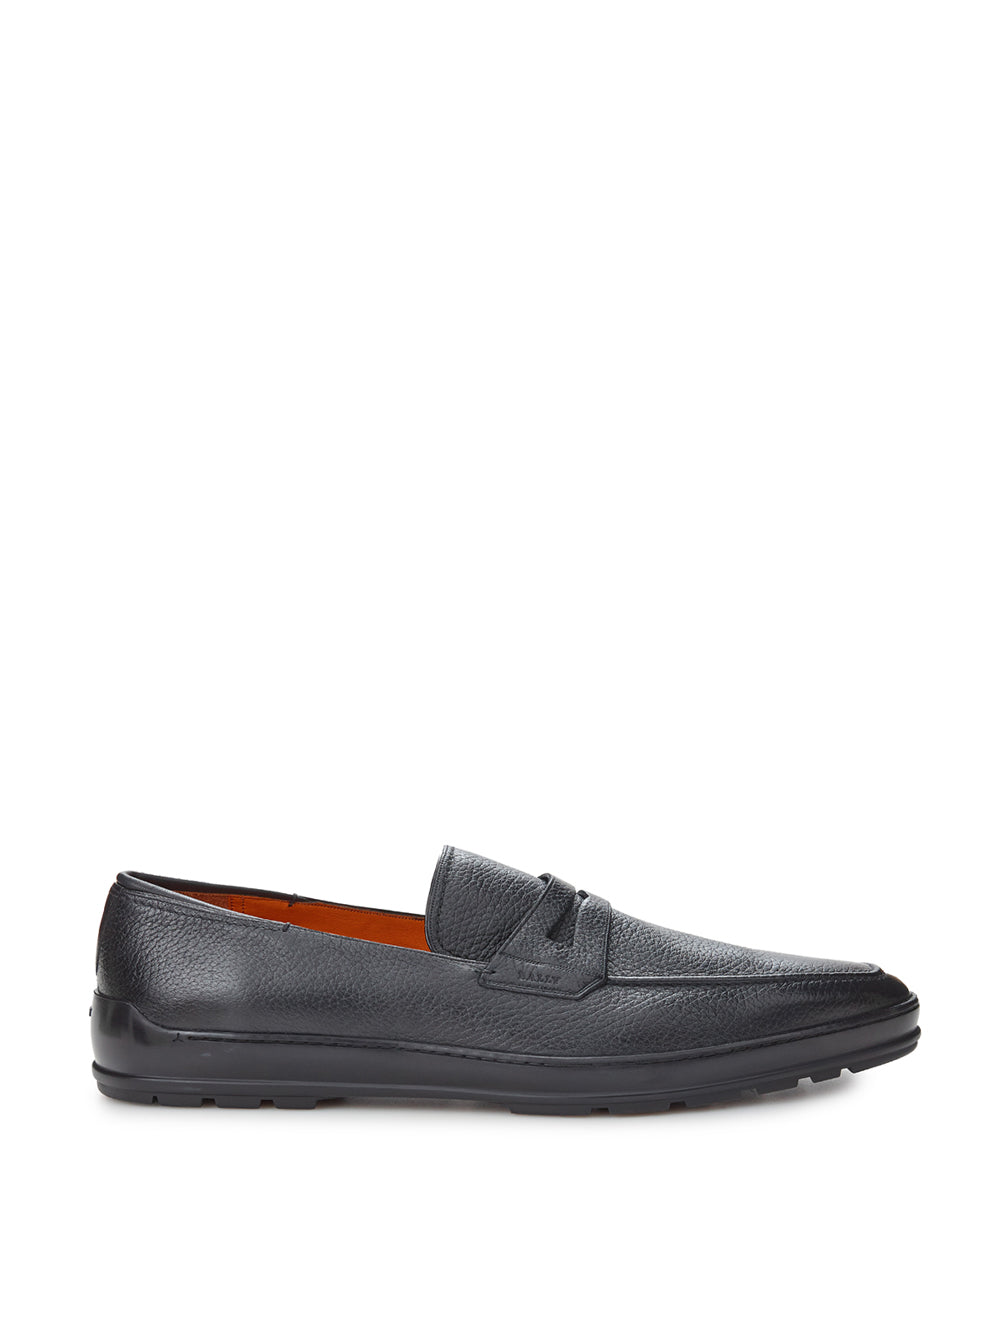 Relon Bally Grained Leather Moccasin